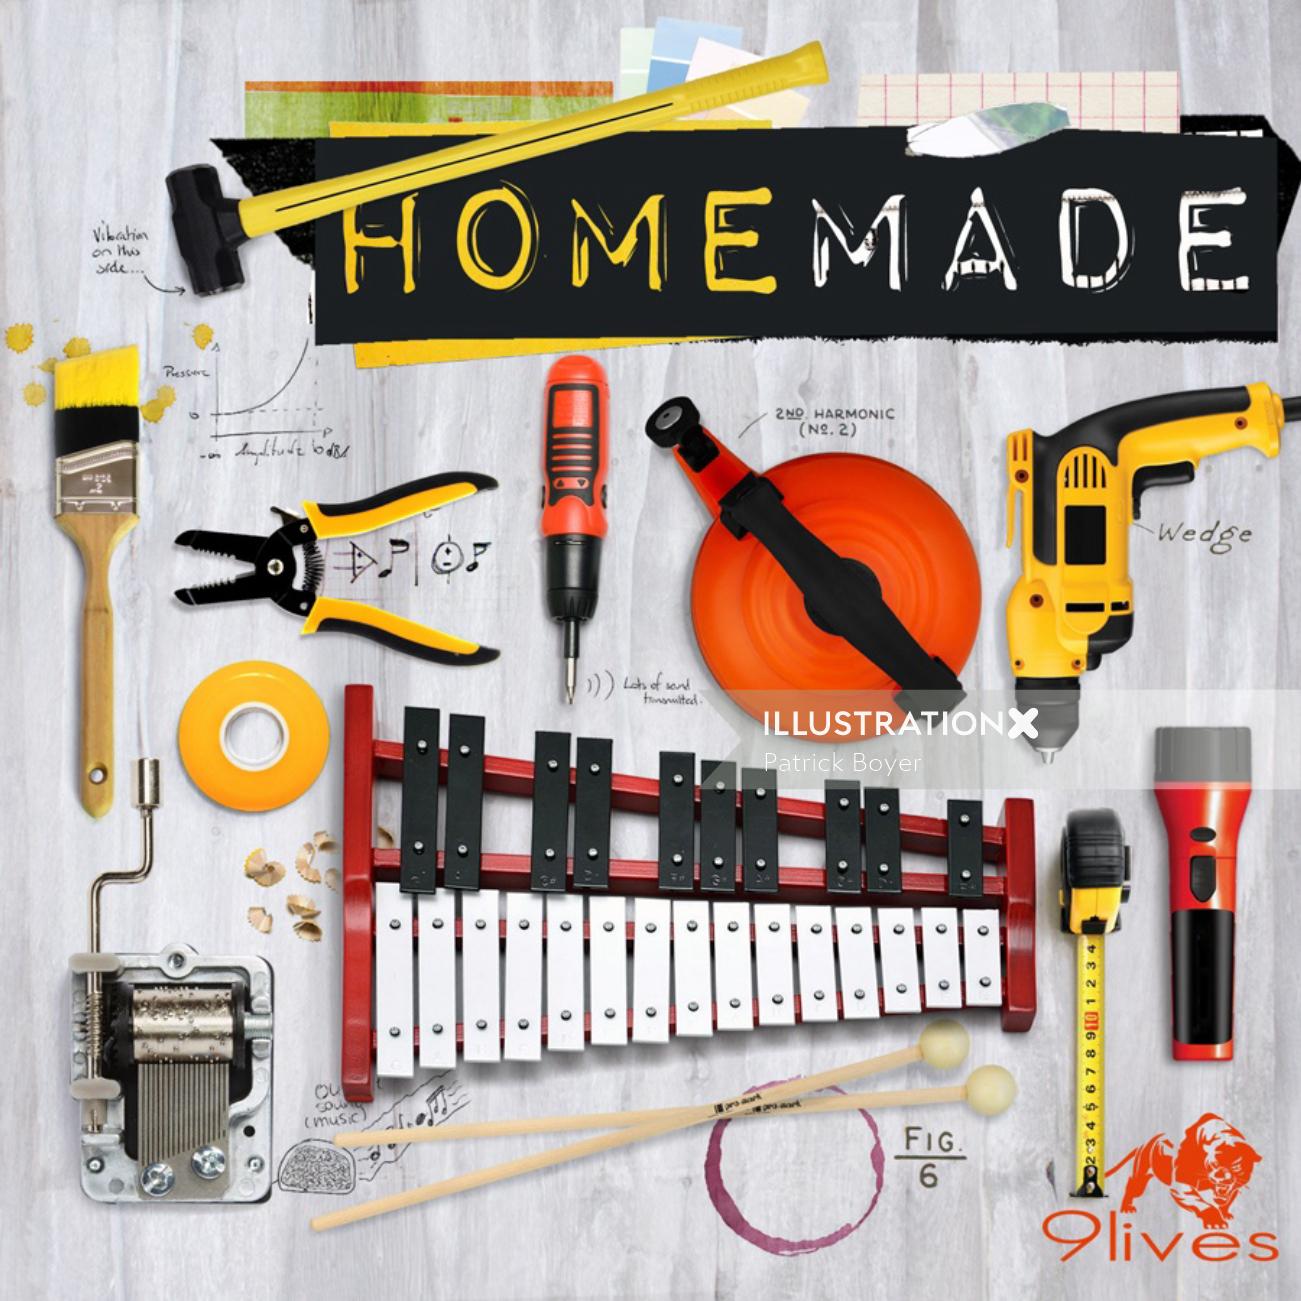 Home Made tools graphic
